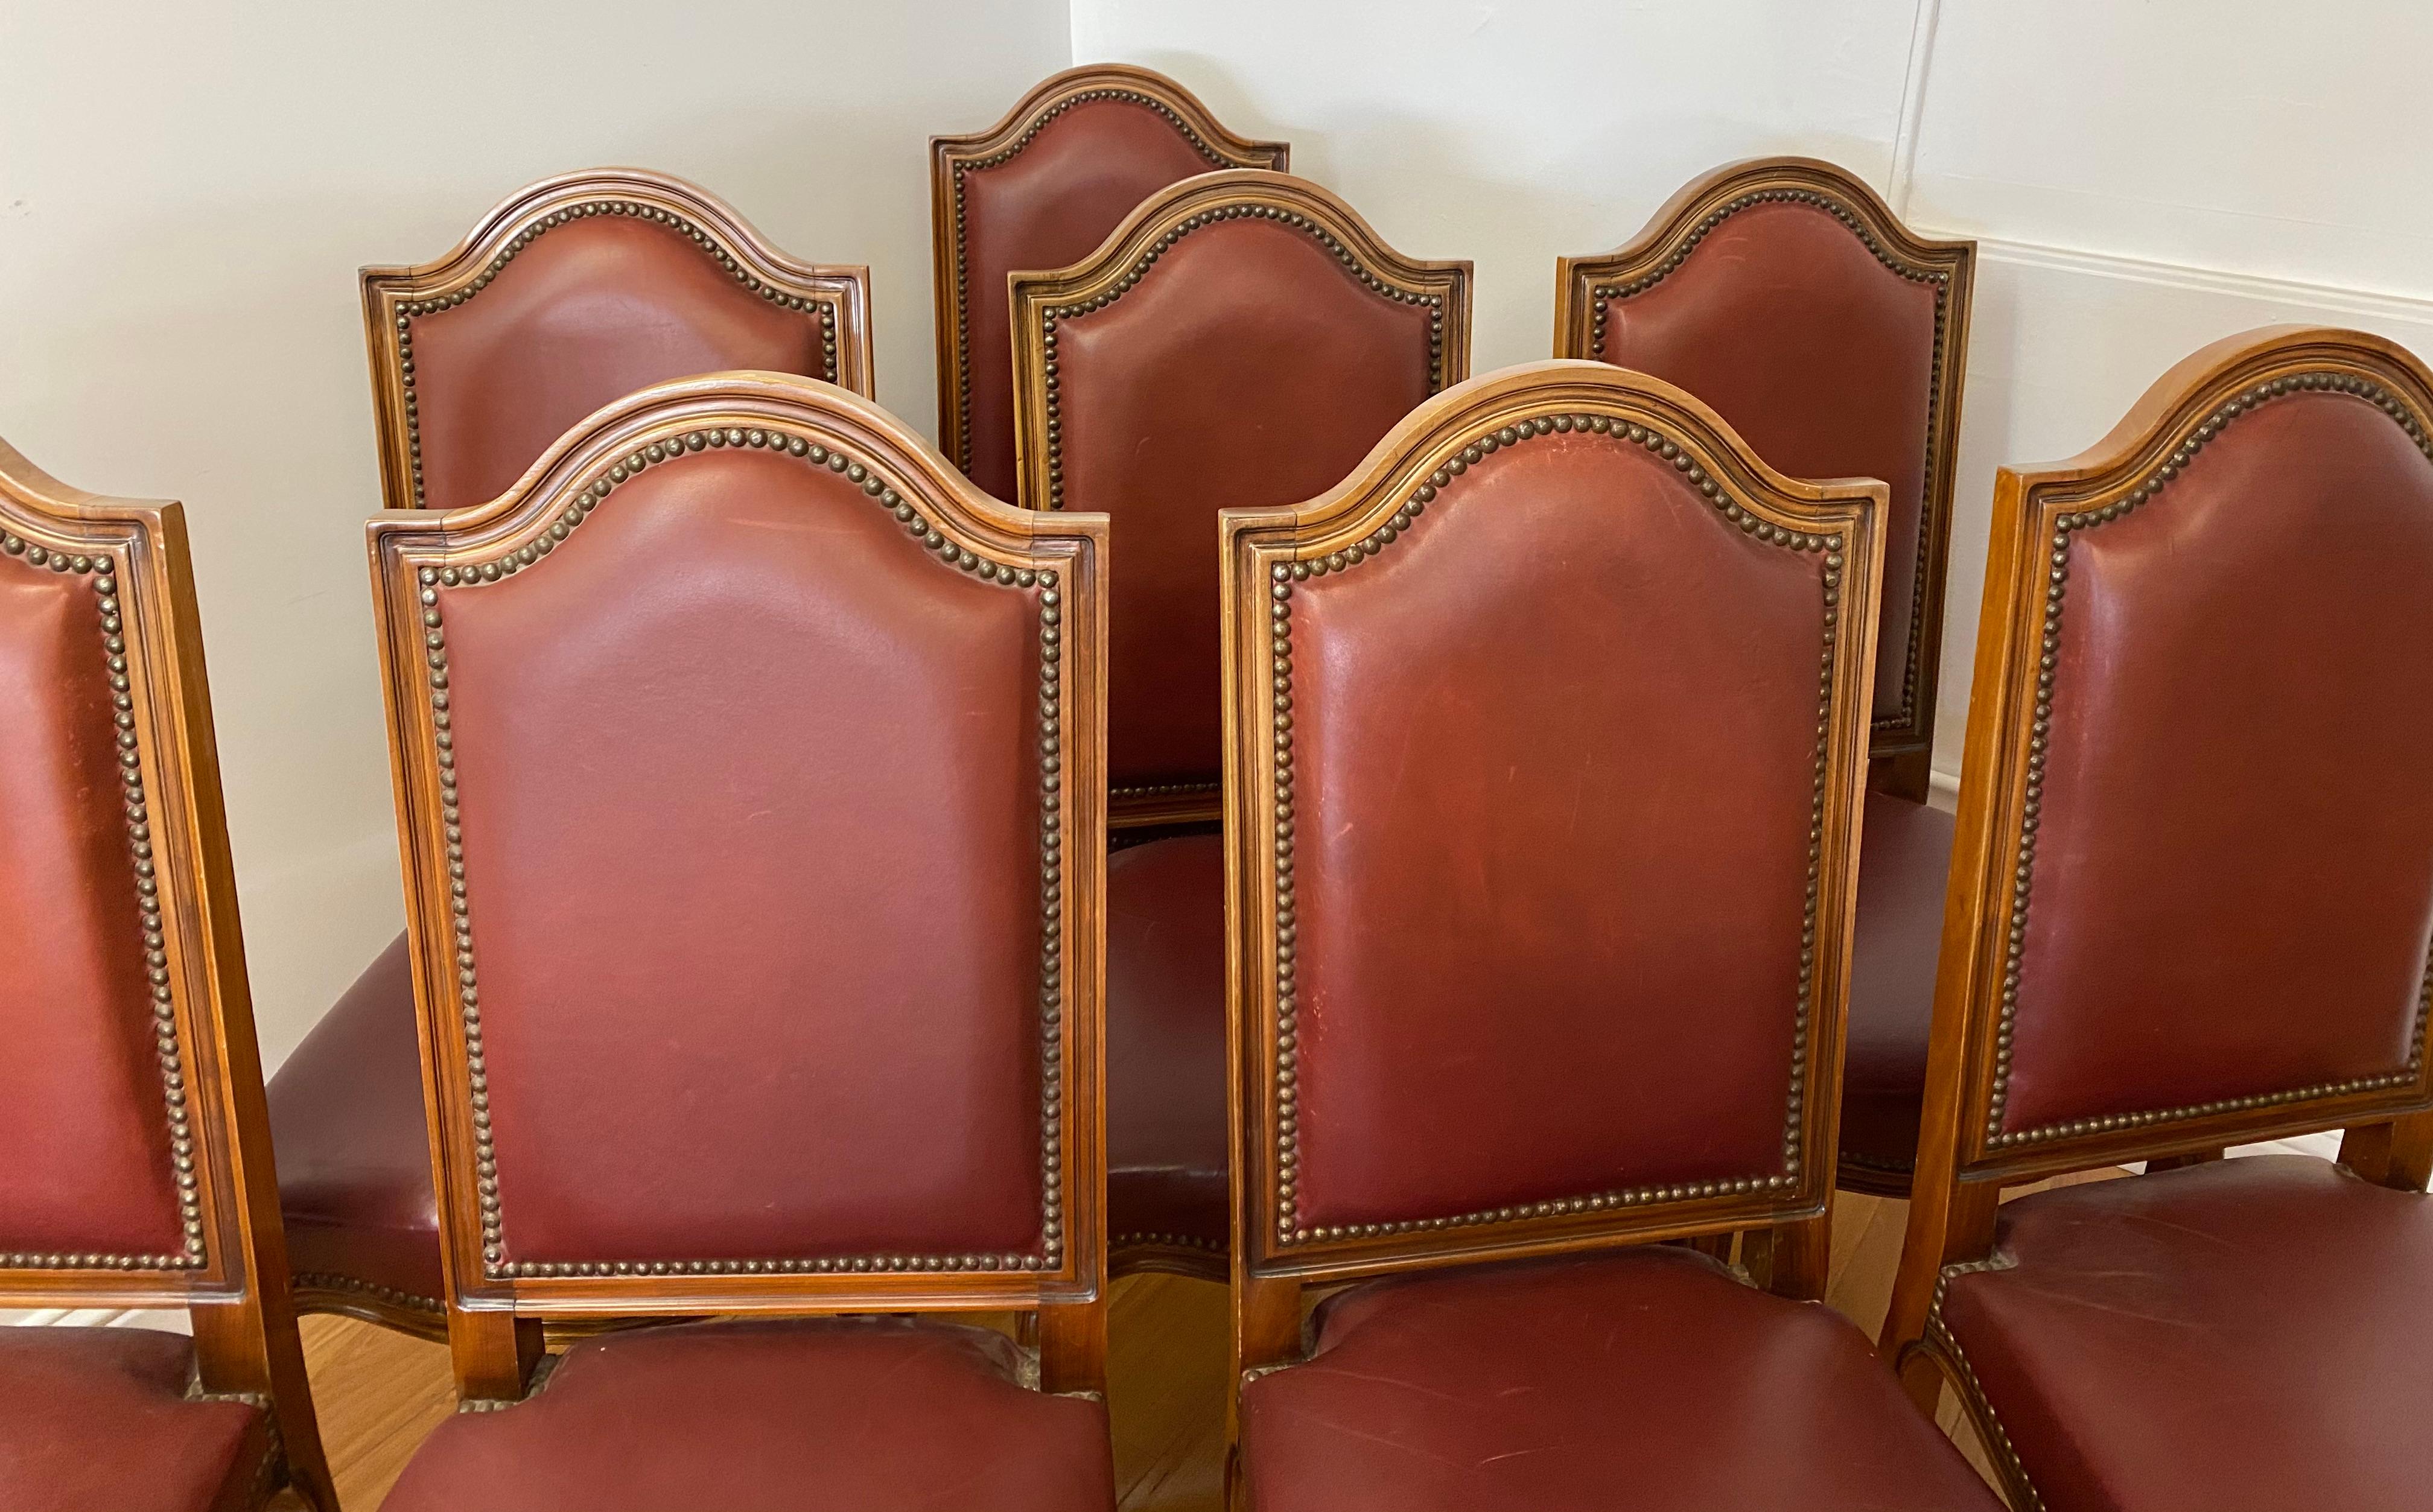 Eight vintage carved & leather upholstered high back dining chairs

Gorgeous set of dining chairs

The chairs are solid, sturdy and comfortable

Brass tacks surround the leather upholstery

Good vintage condition 

Measures: 20